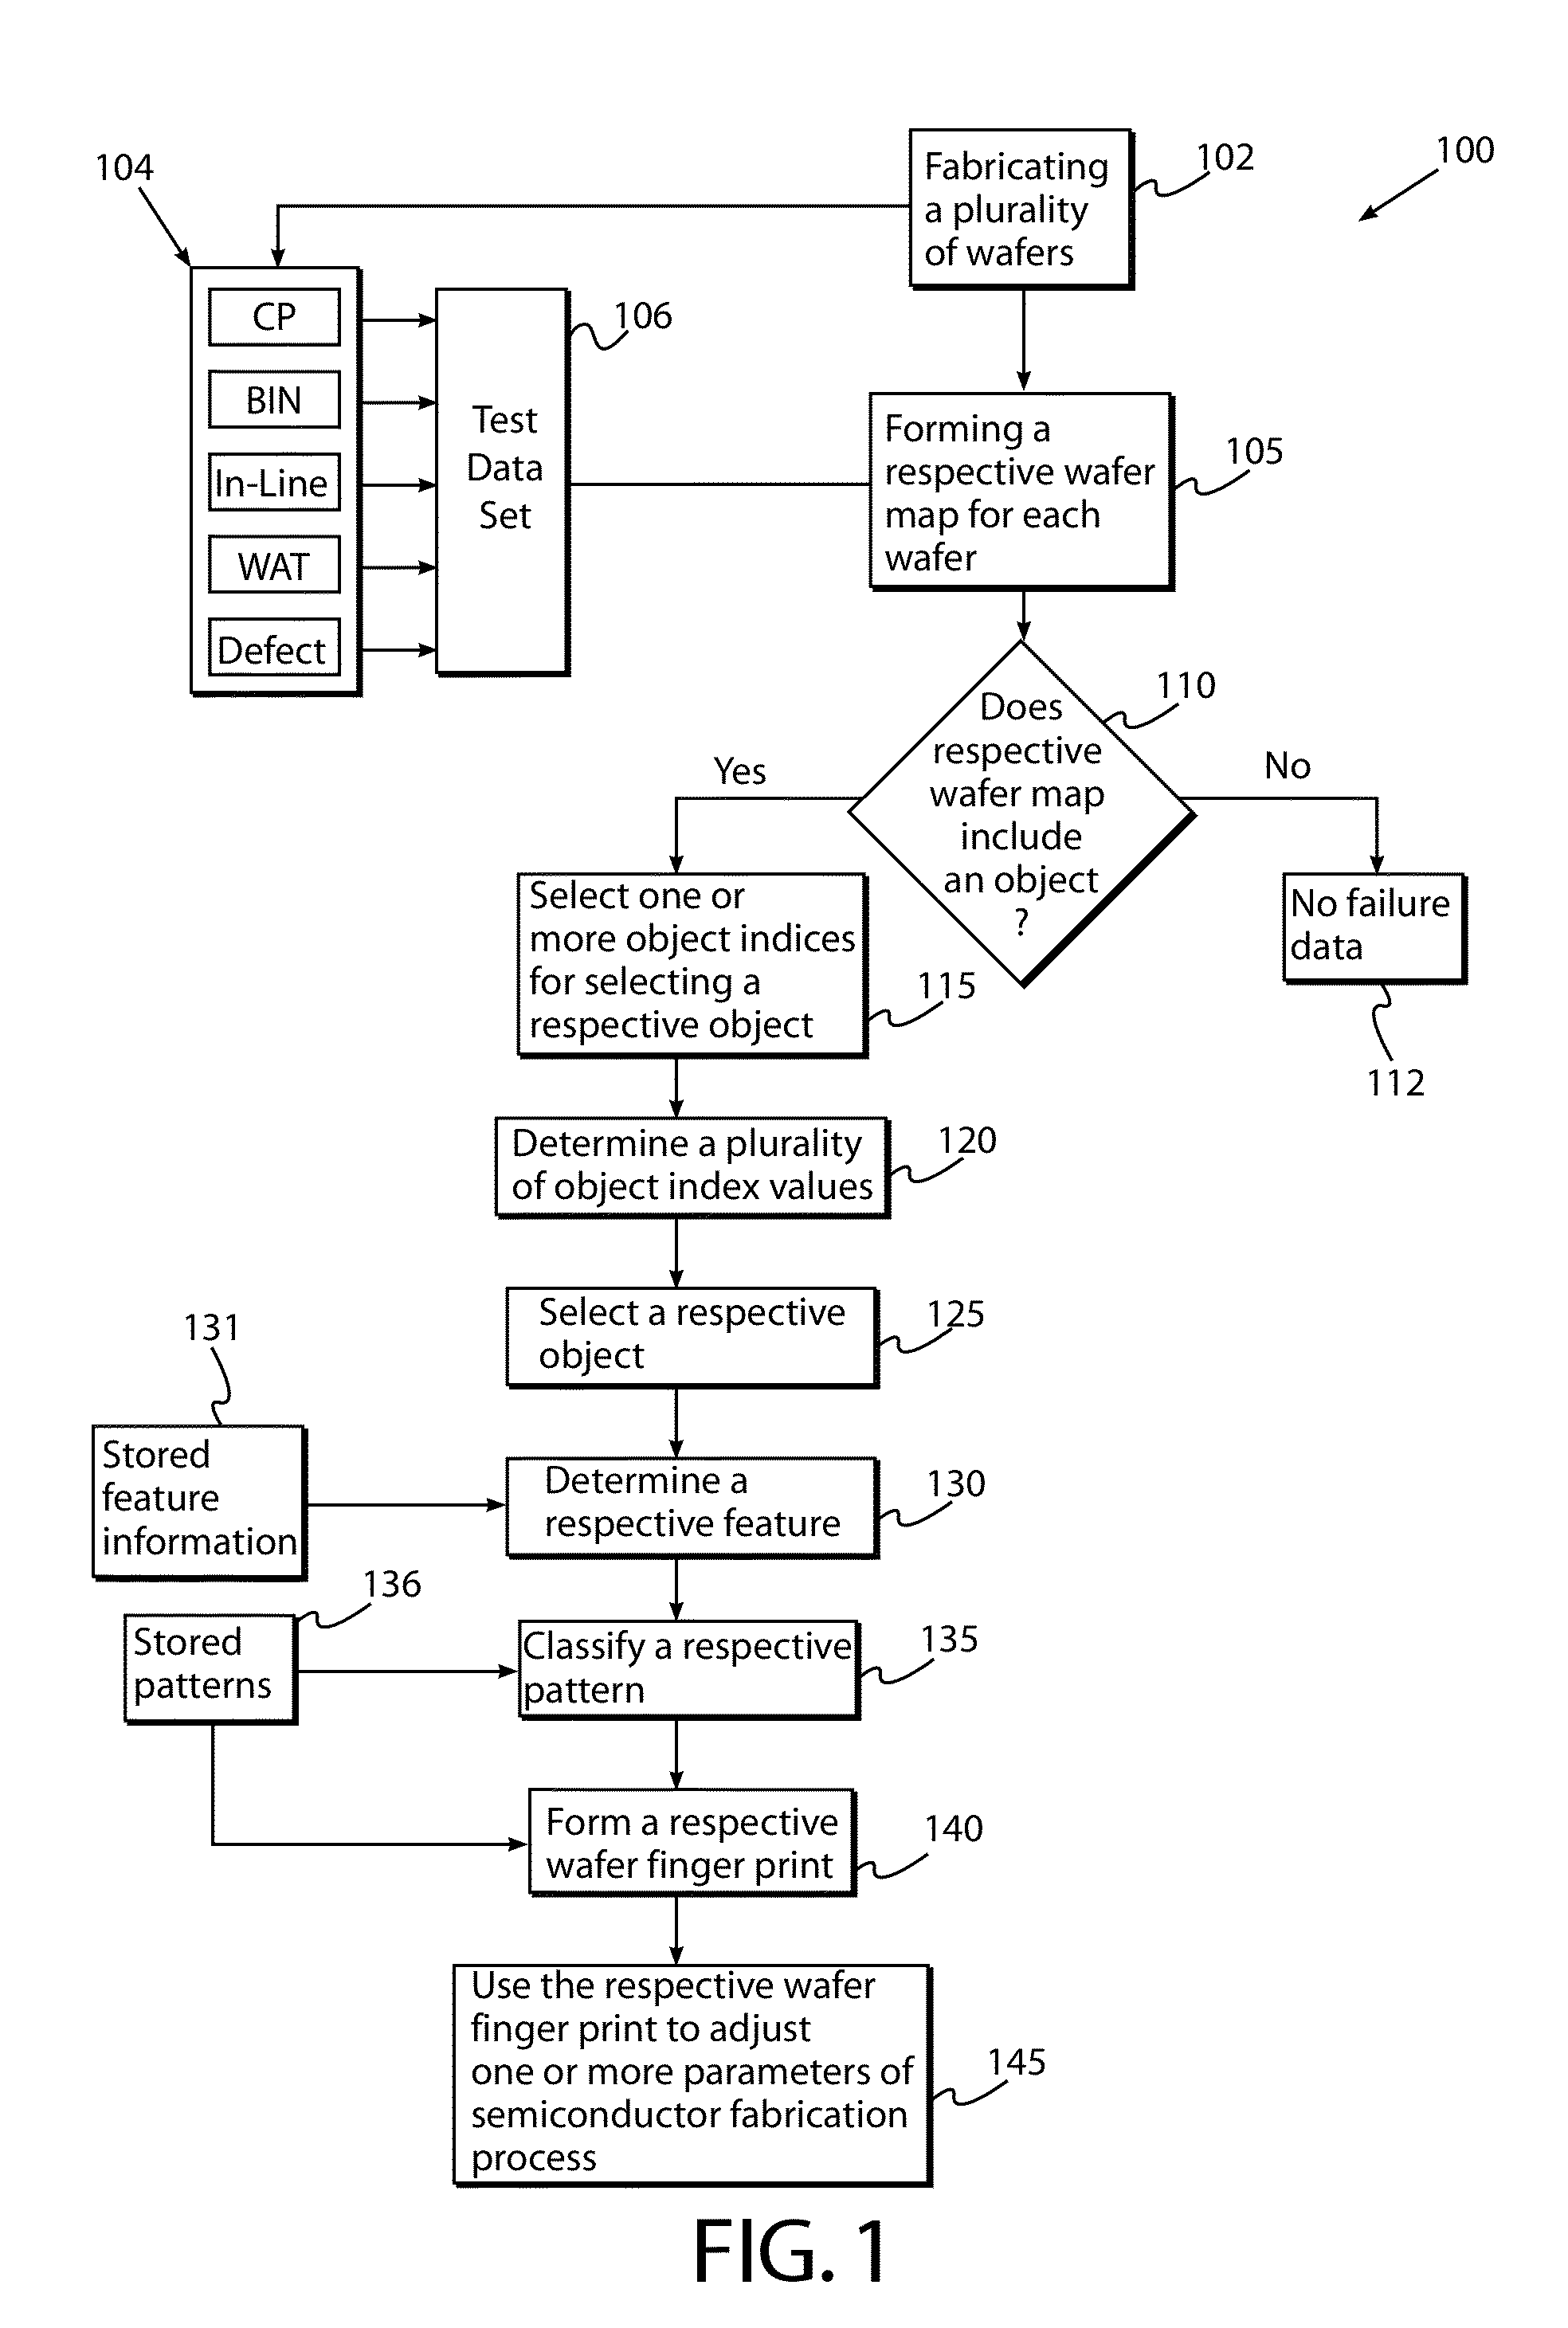 Systems and methods of automatically detecting failure patterns for semiconductor wafer fabrication processes